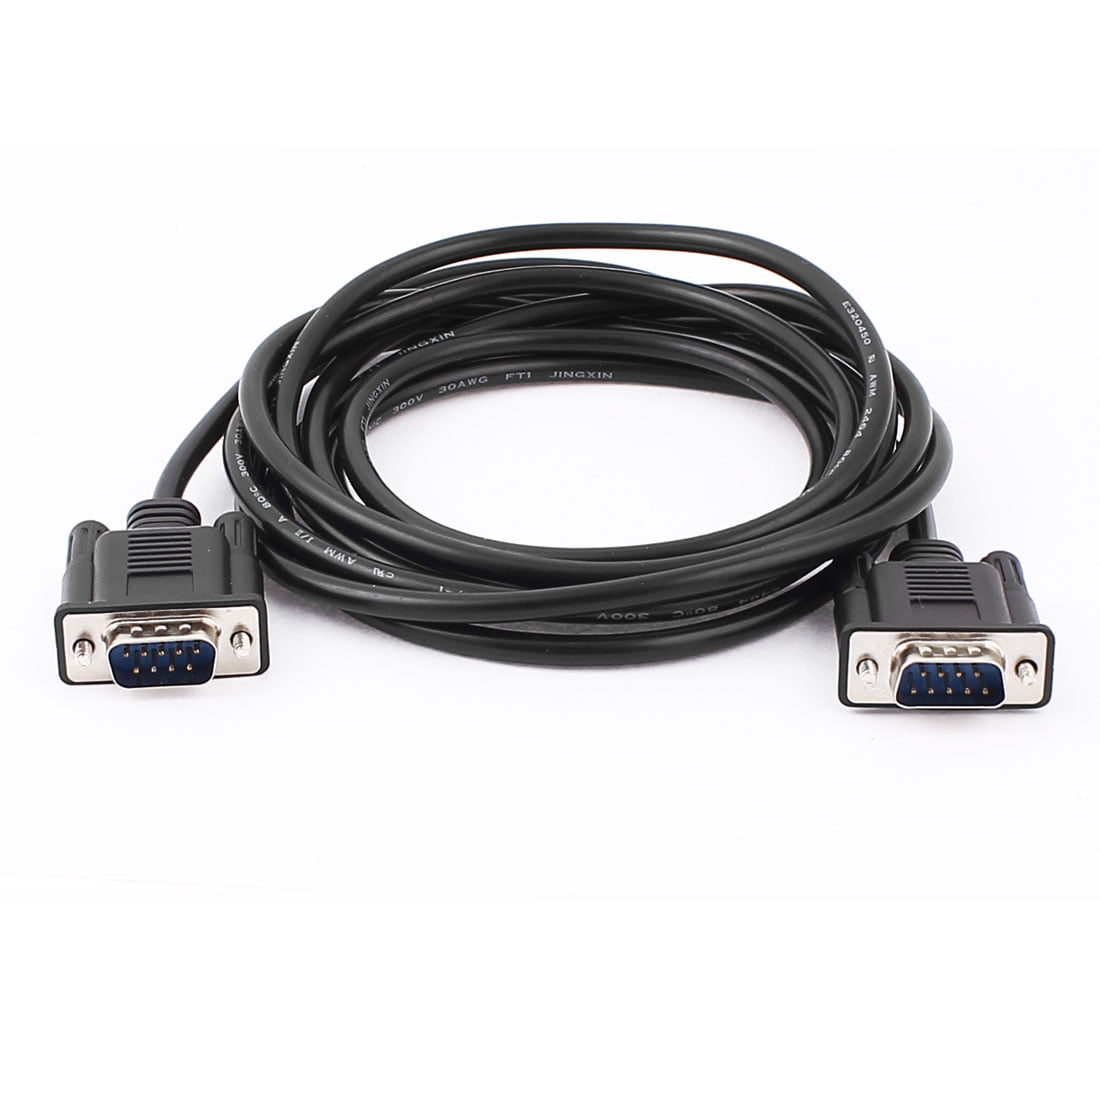 VGA CABLE MALE TO MALE MONITOR CABLE LCD VGA CABLE LEAD 3M HIGH QUALITY NEW 